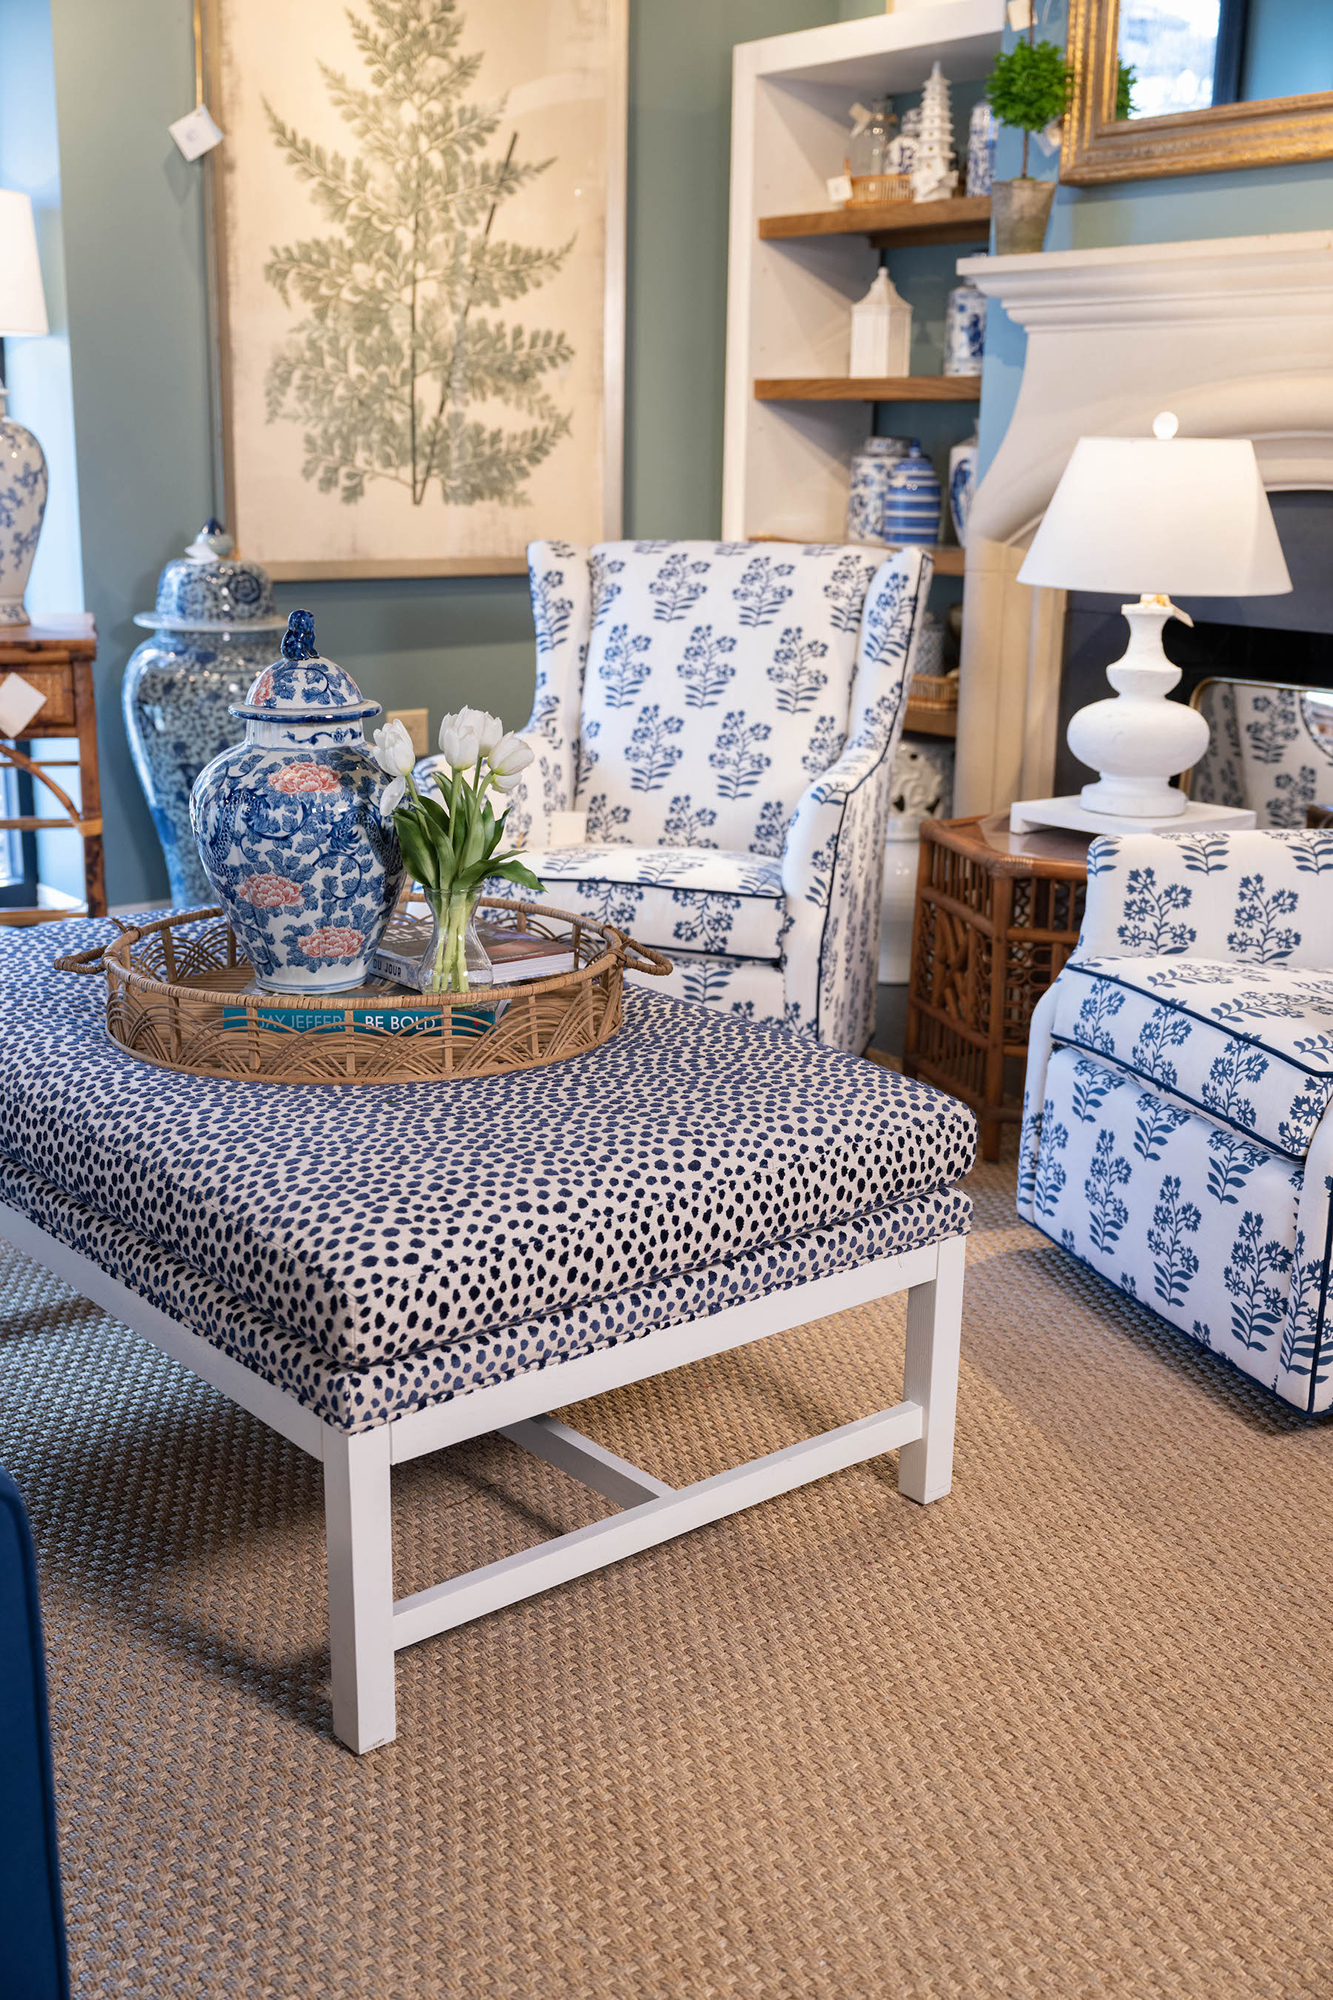 Ottomans are a great source of texture in a room, like this blue and white speckled design.